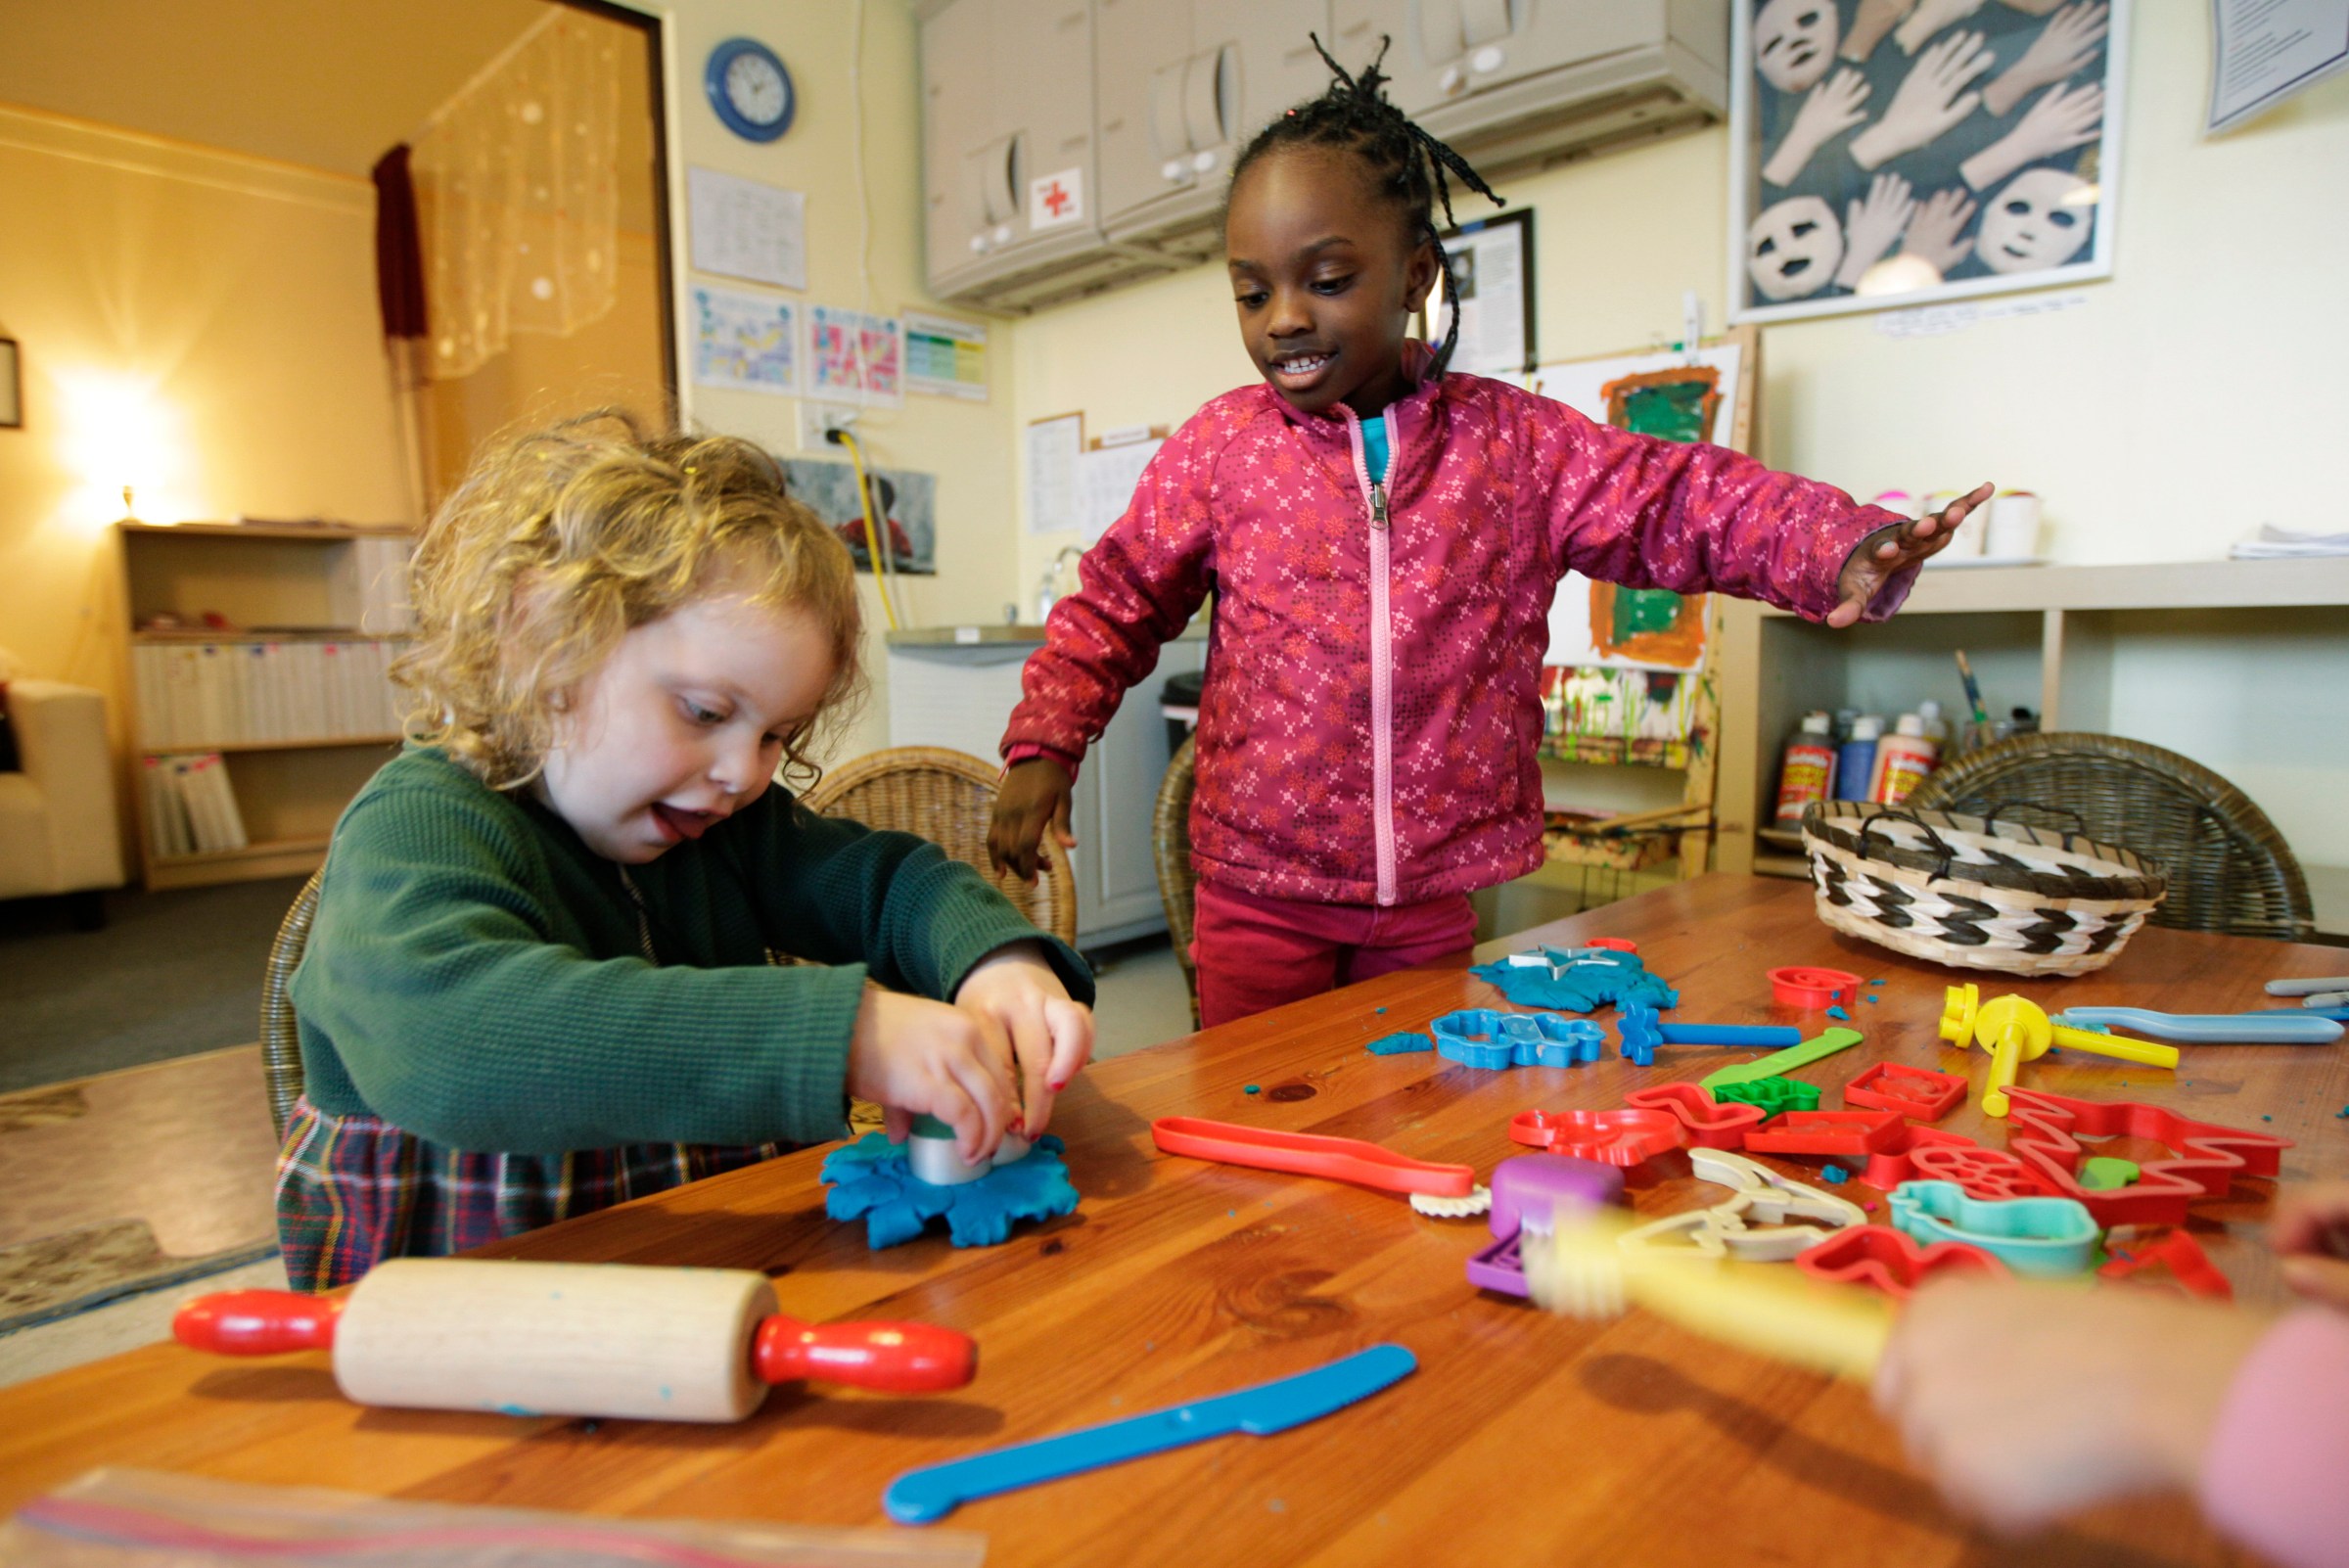 Canada is promoting child care for $10 a day